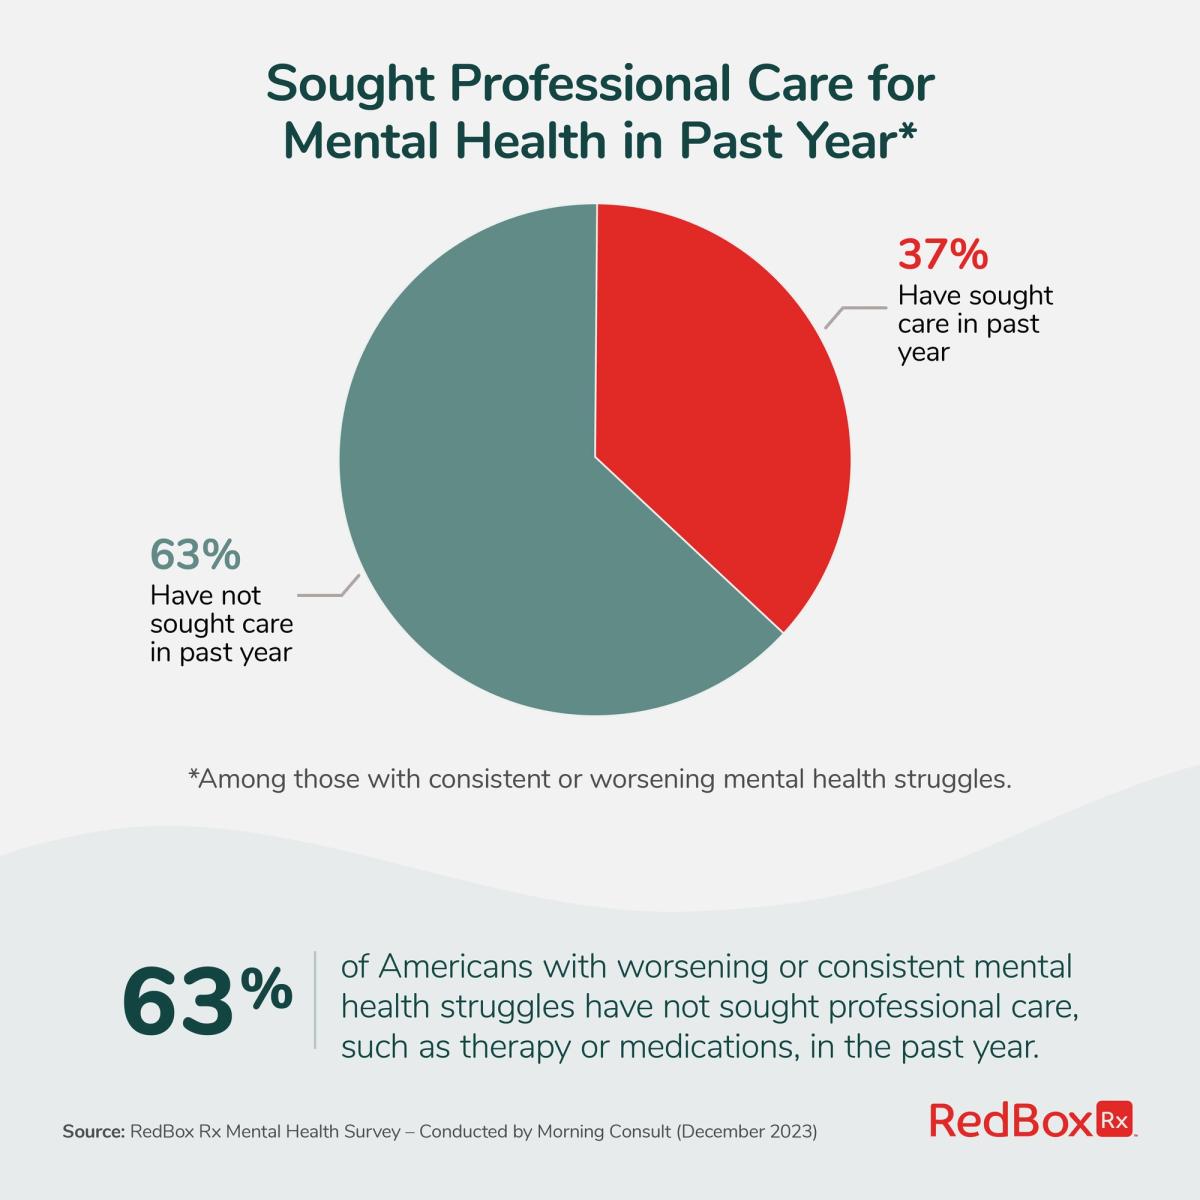 63% of Americans With Worsening Mental Health Struggles Have Not Sought Care in the Past Year